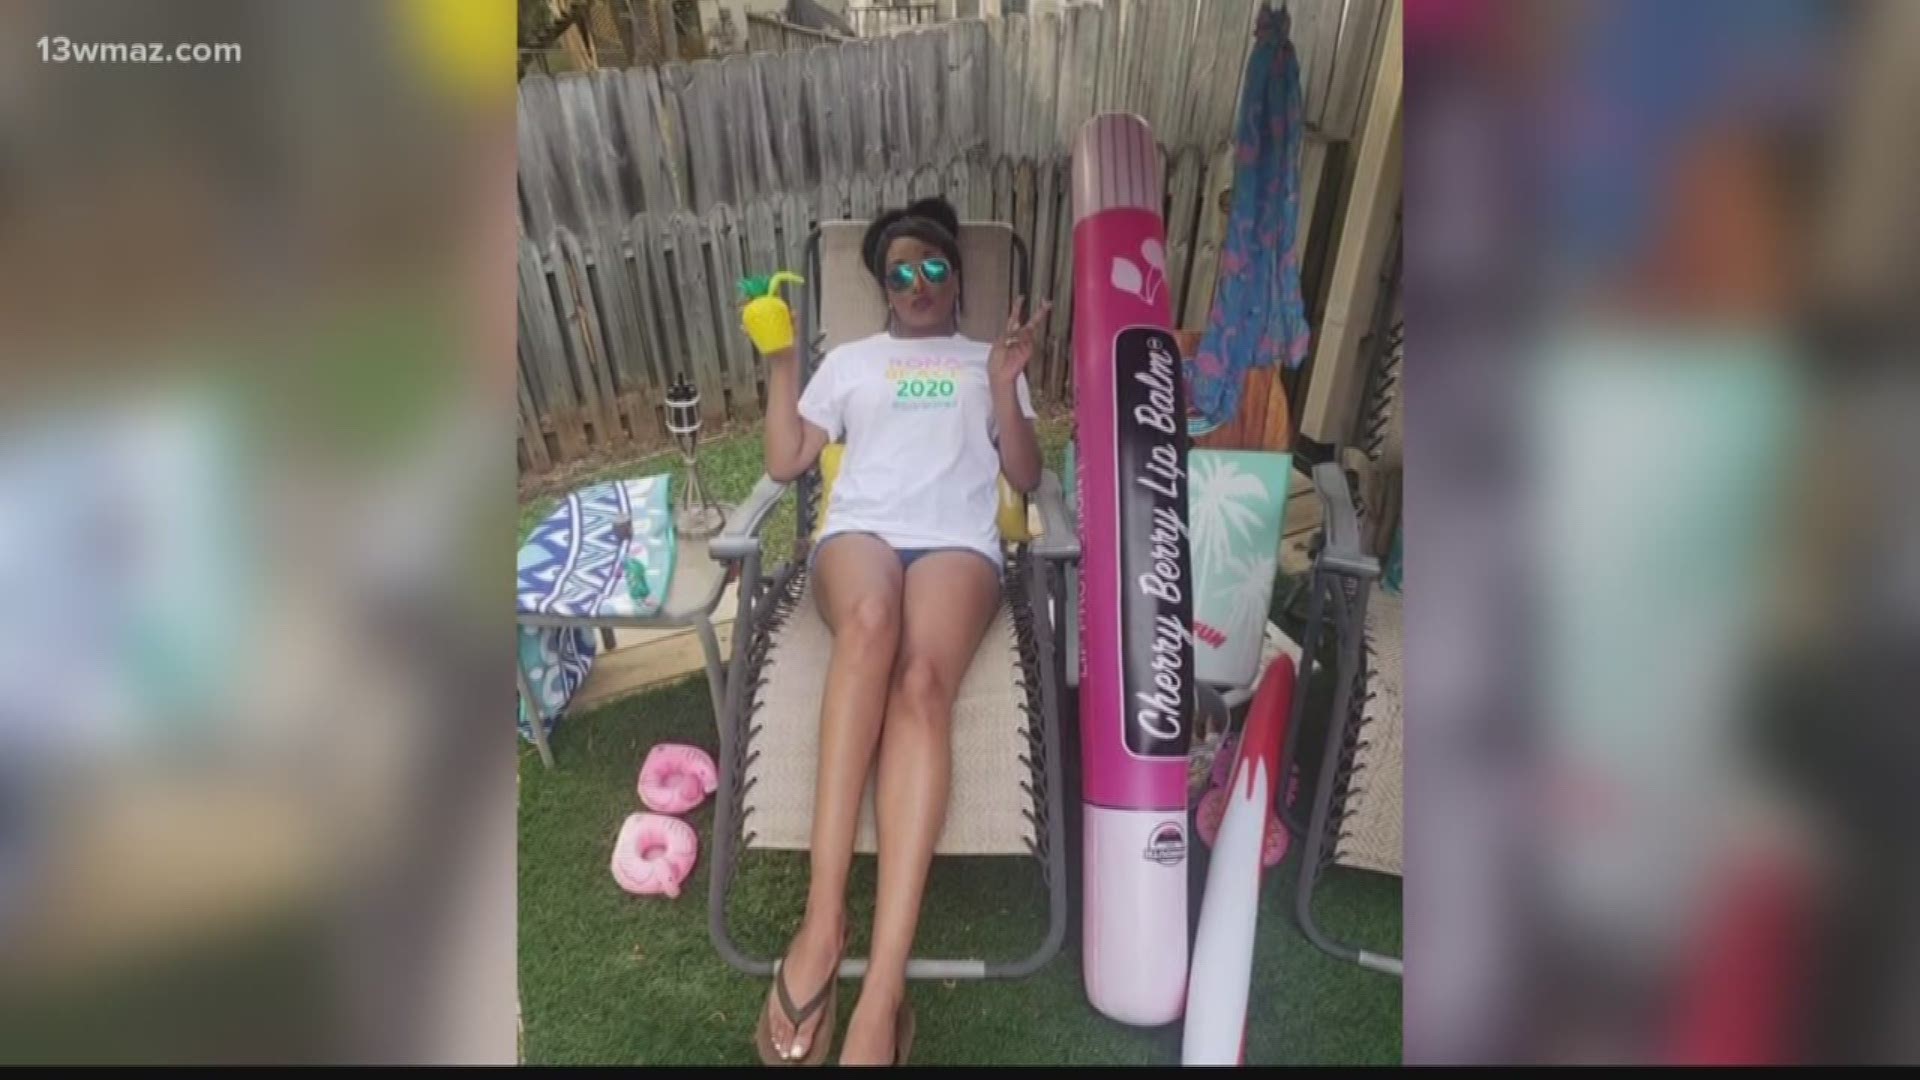 A lot of folks had to change their spring break vacations this year, but one Macon couple decided if they couldn't go to the beach, they'd bring it to their home.